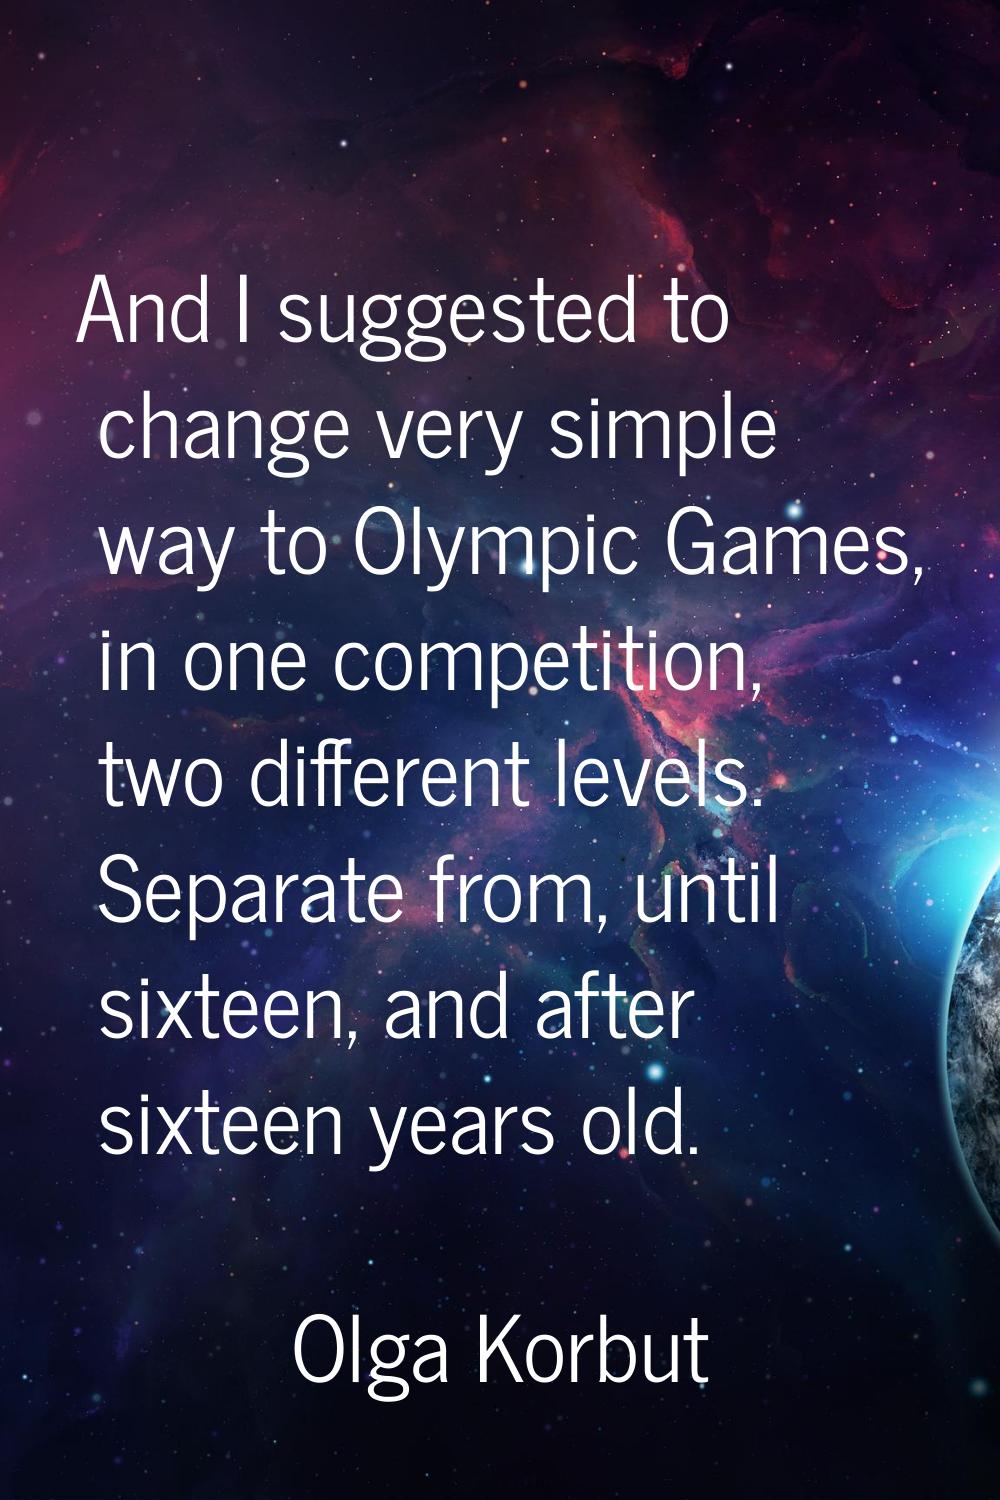 And I suggested to change very simple way to Olympic Games, in one competition, two different level